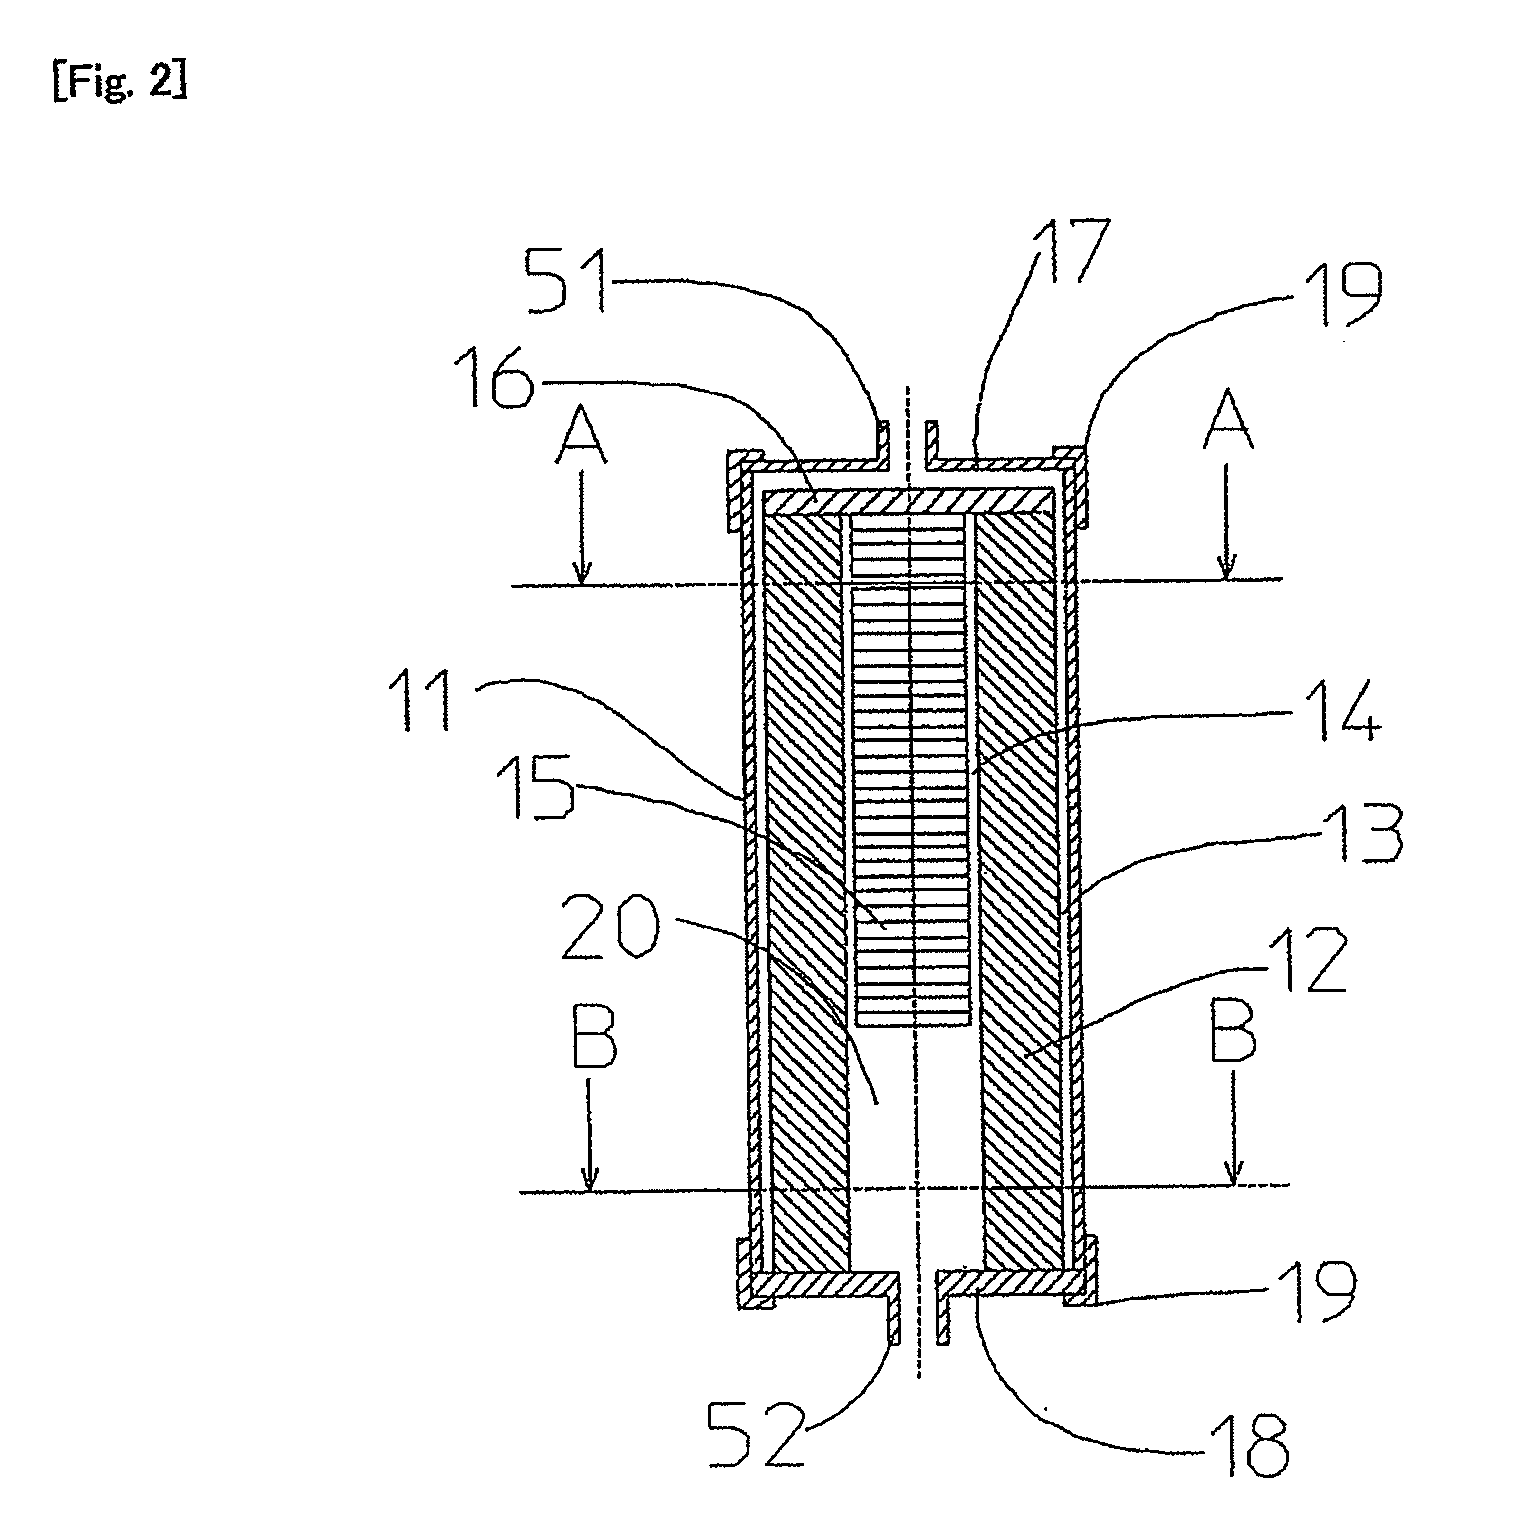 Body fluid treating filter device